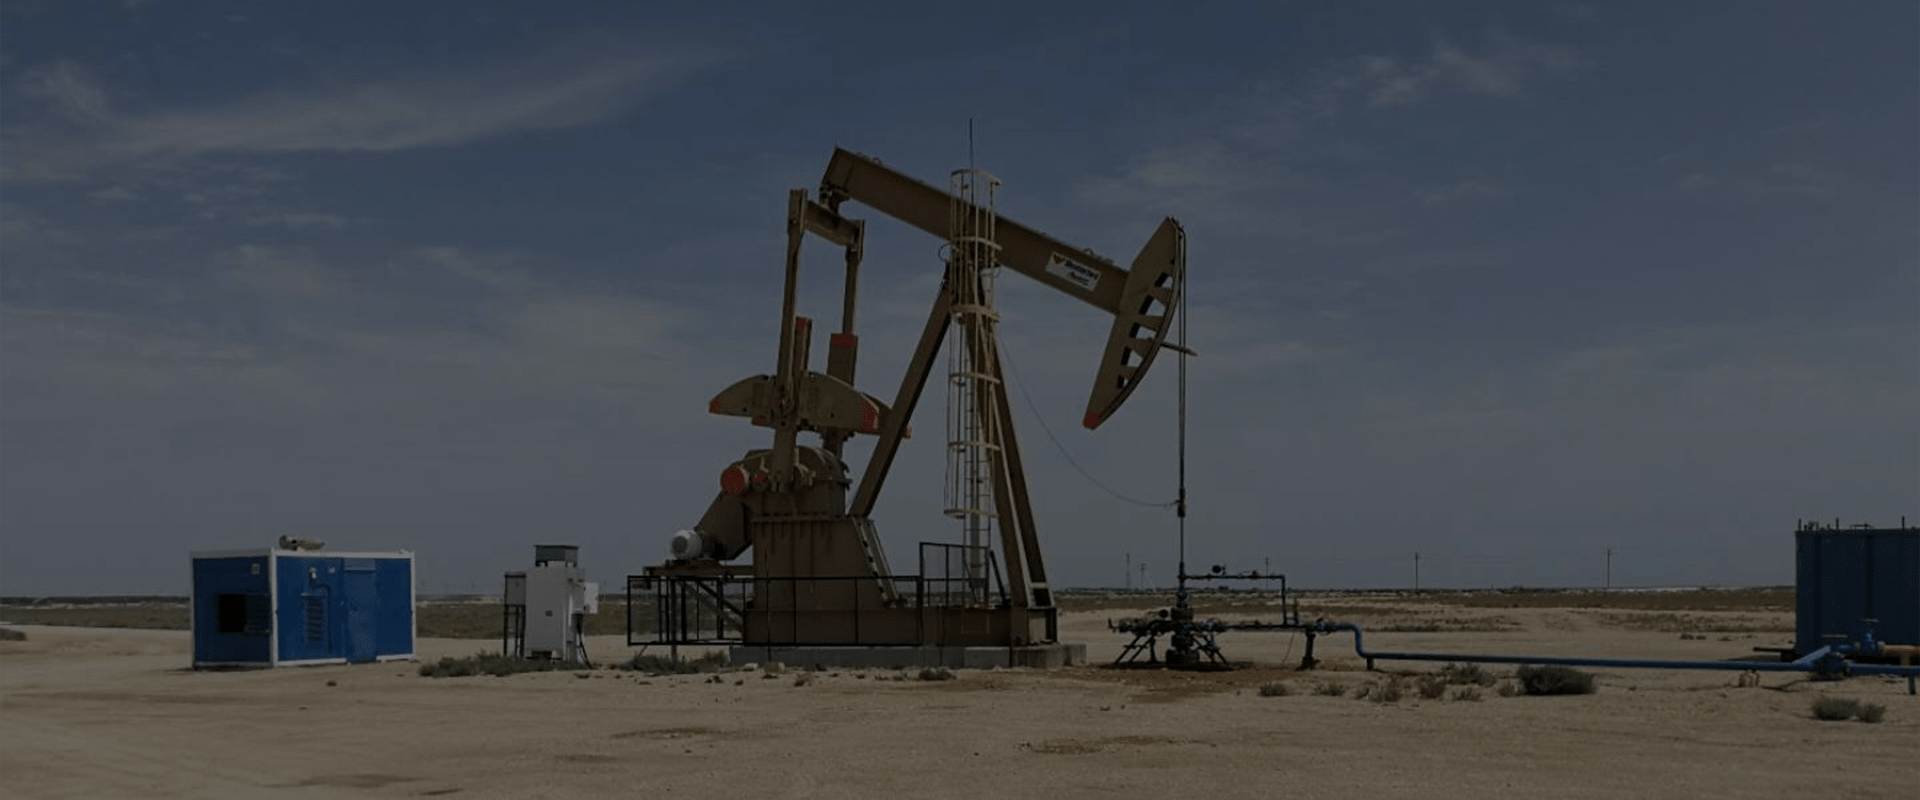 Environmental protection in the oil production sector